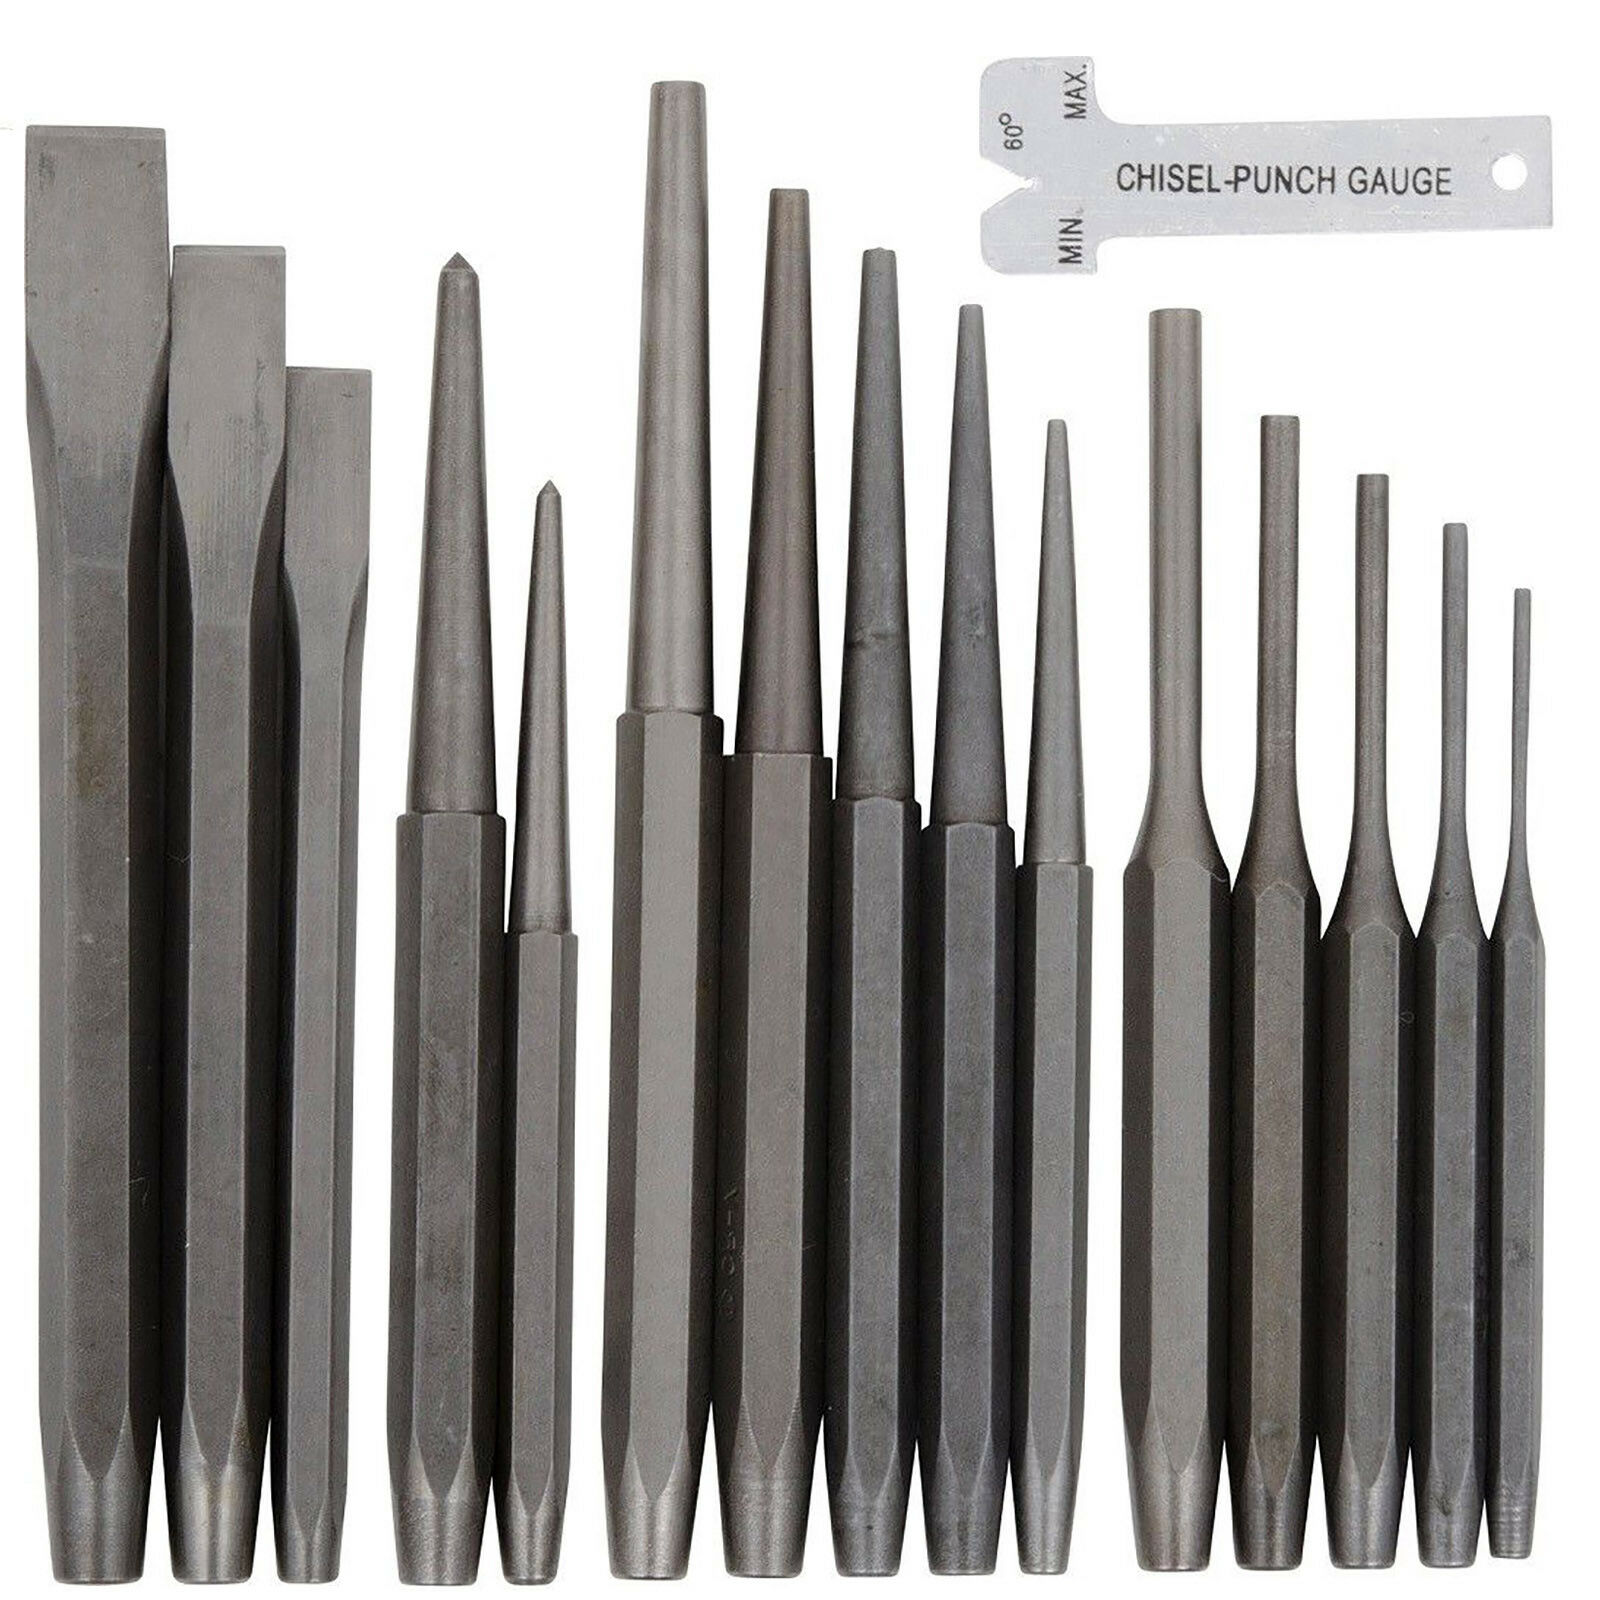 Details about  / 16pc Mechanics Punch and Chisel Set Industrial Pin Tapered Center Chisel Punch